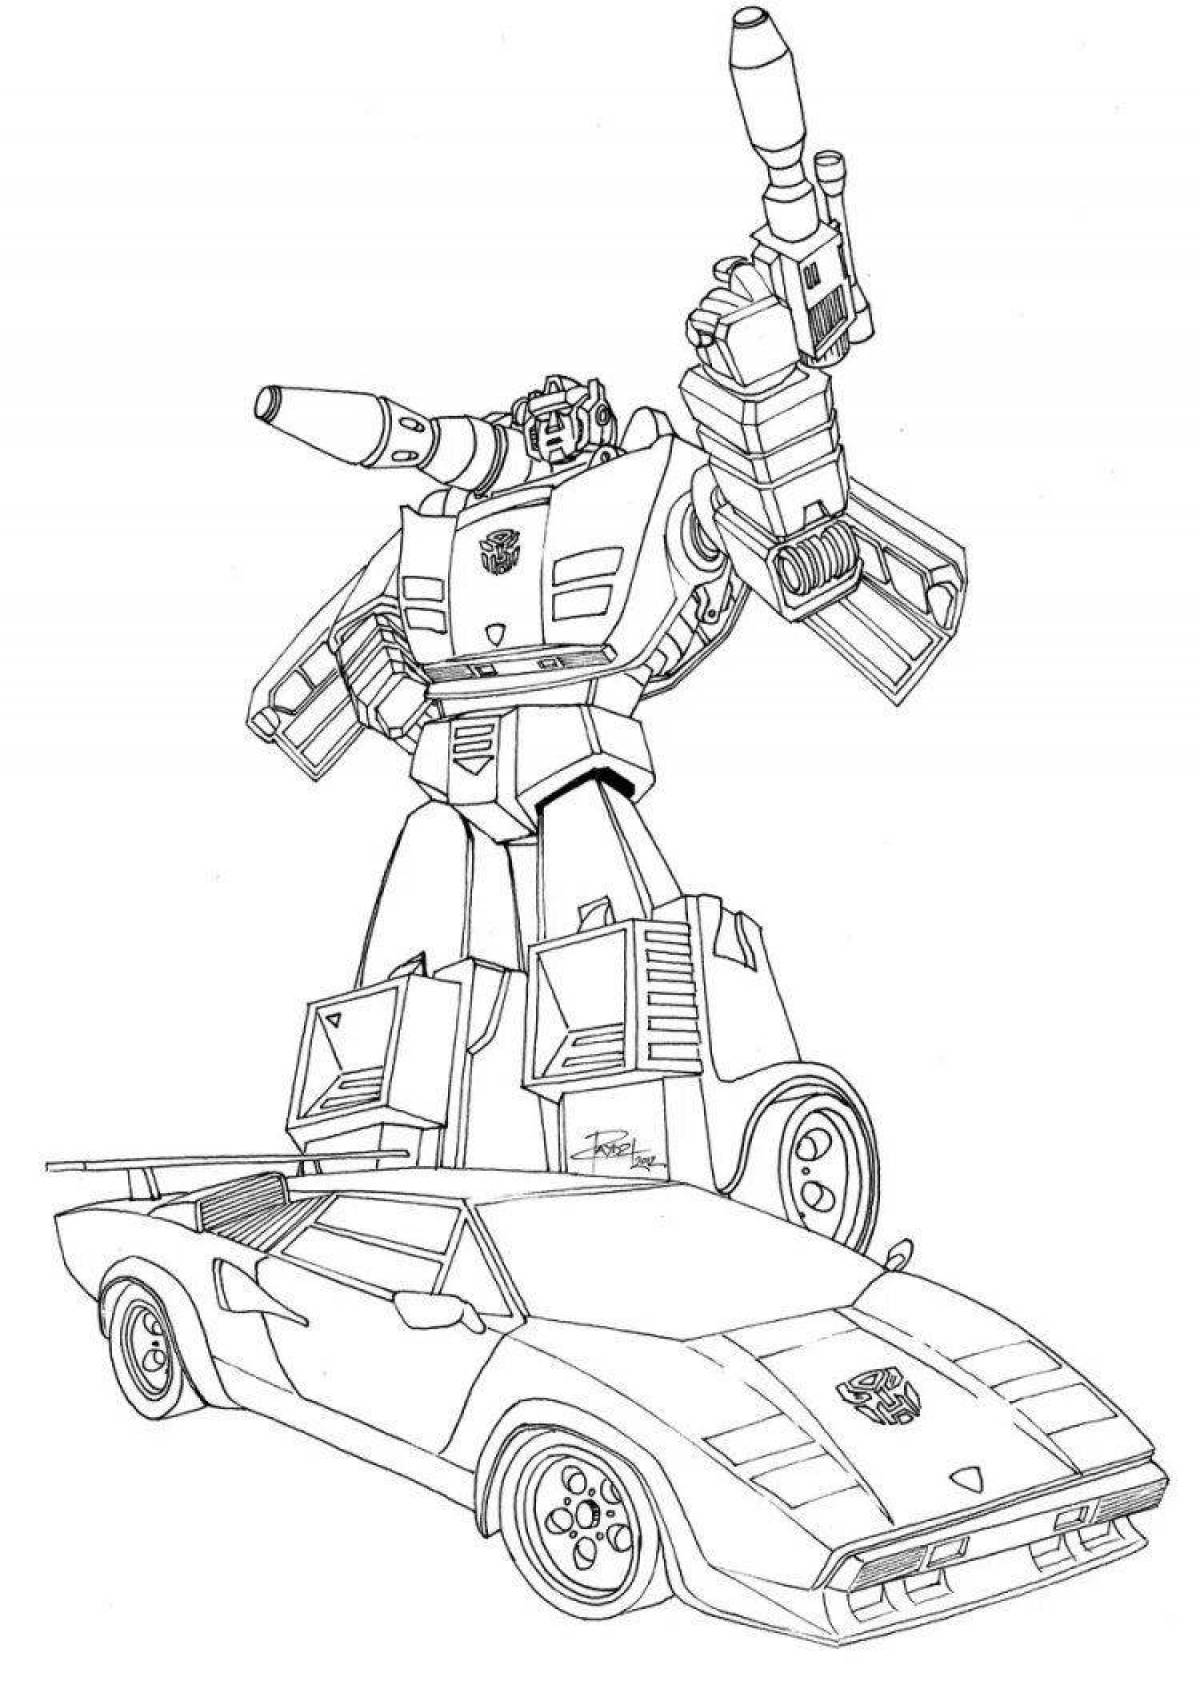 Coloring page adorable robot cars